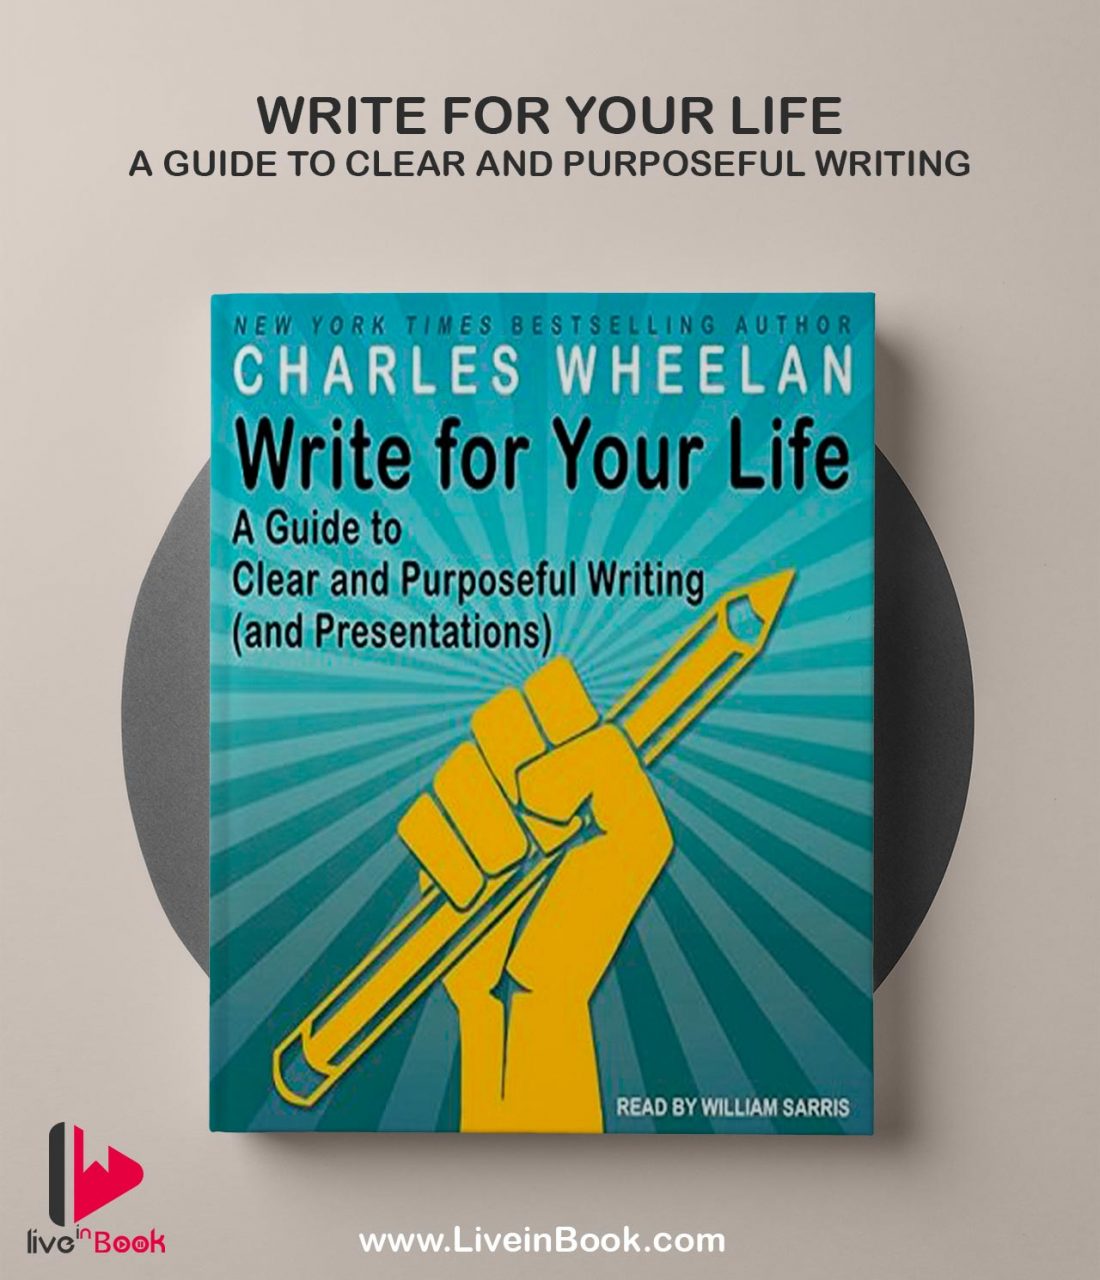 download Write for Your Life book free